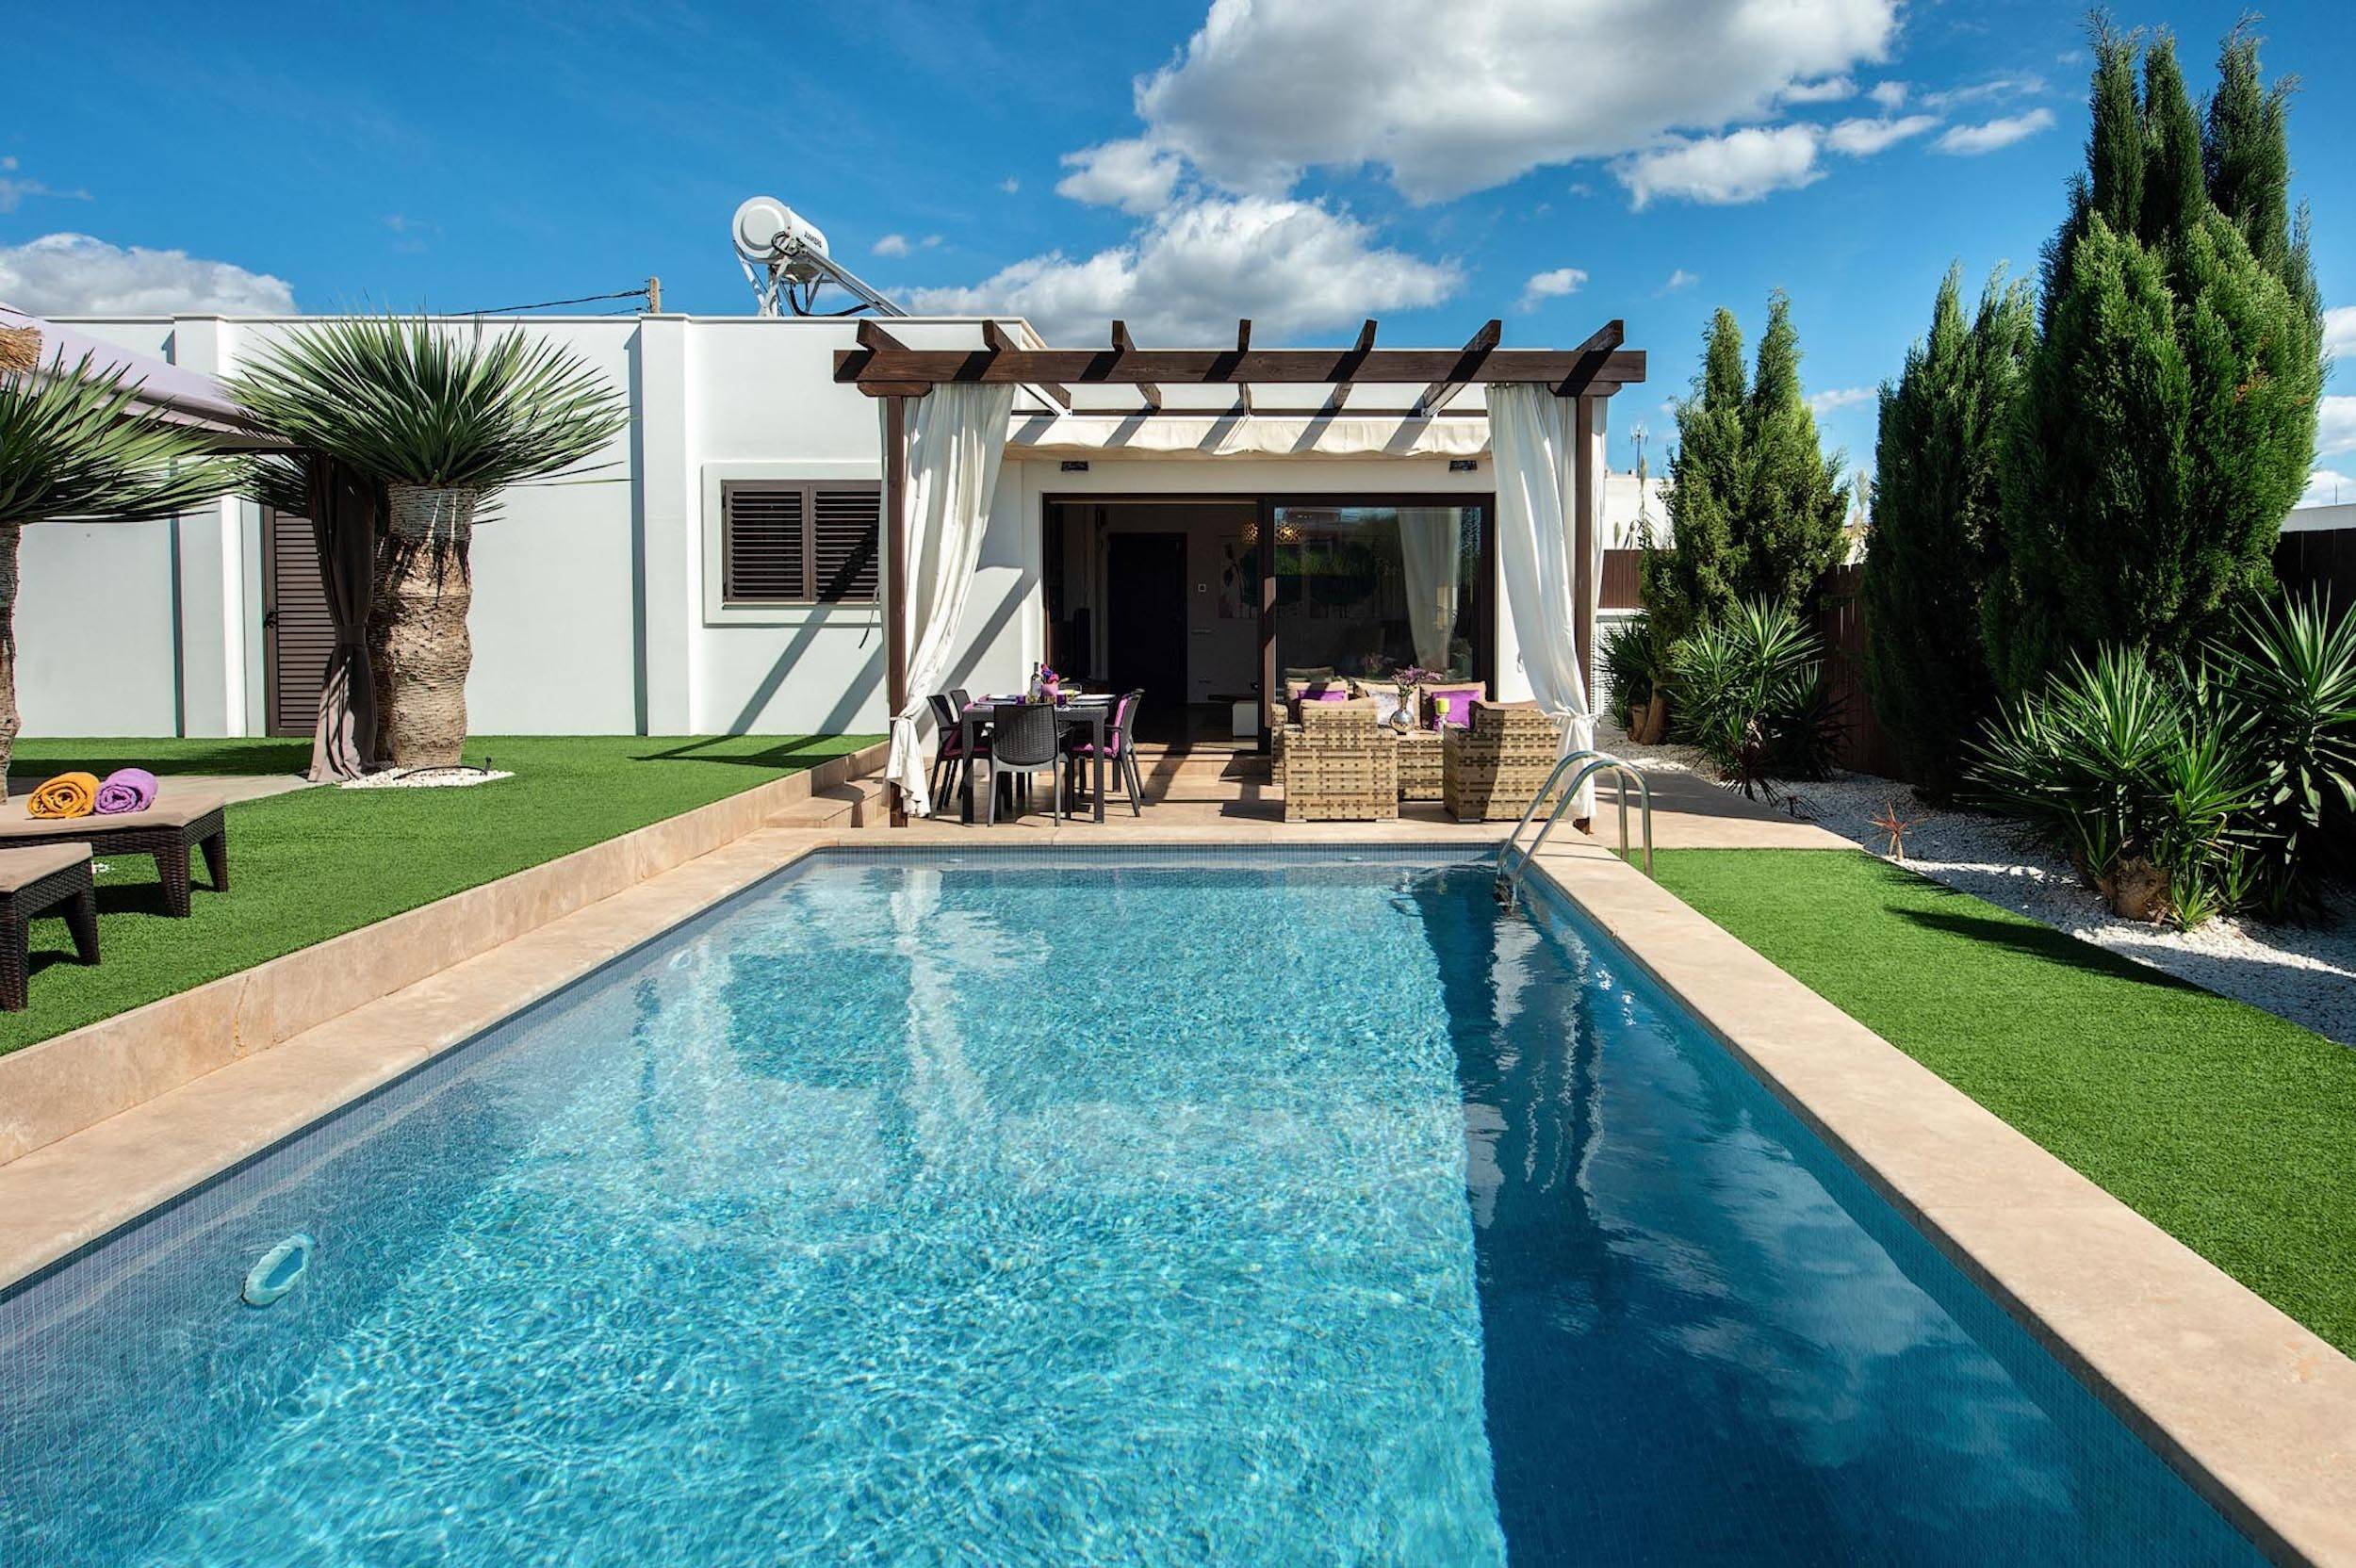 You are currently viewing Villa Tavaris “A charming, newly built 3-bedroom villa”